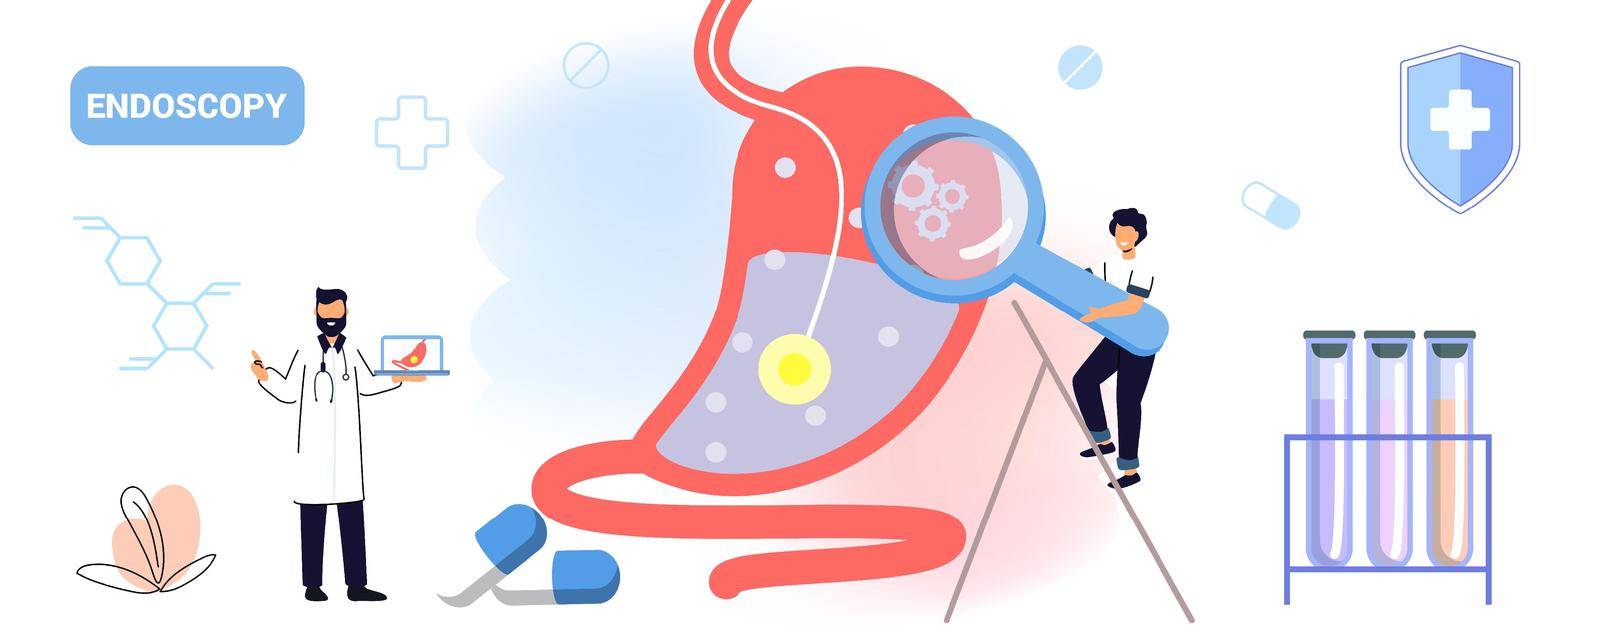 Endoscopy healthcare technology concept vector illustration Gastroenterology stomach and digestive system Medical internal organs disease health care Tract system examination Ultrasound xray diagnosis